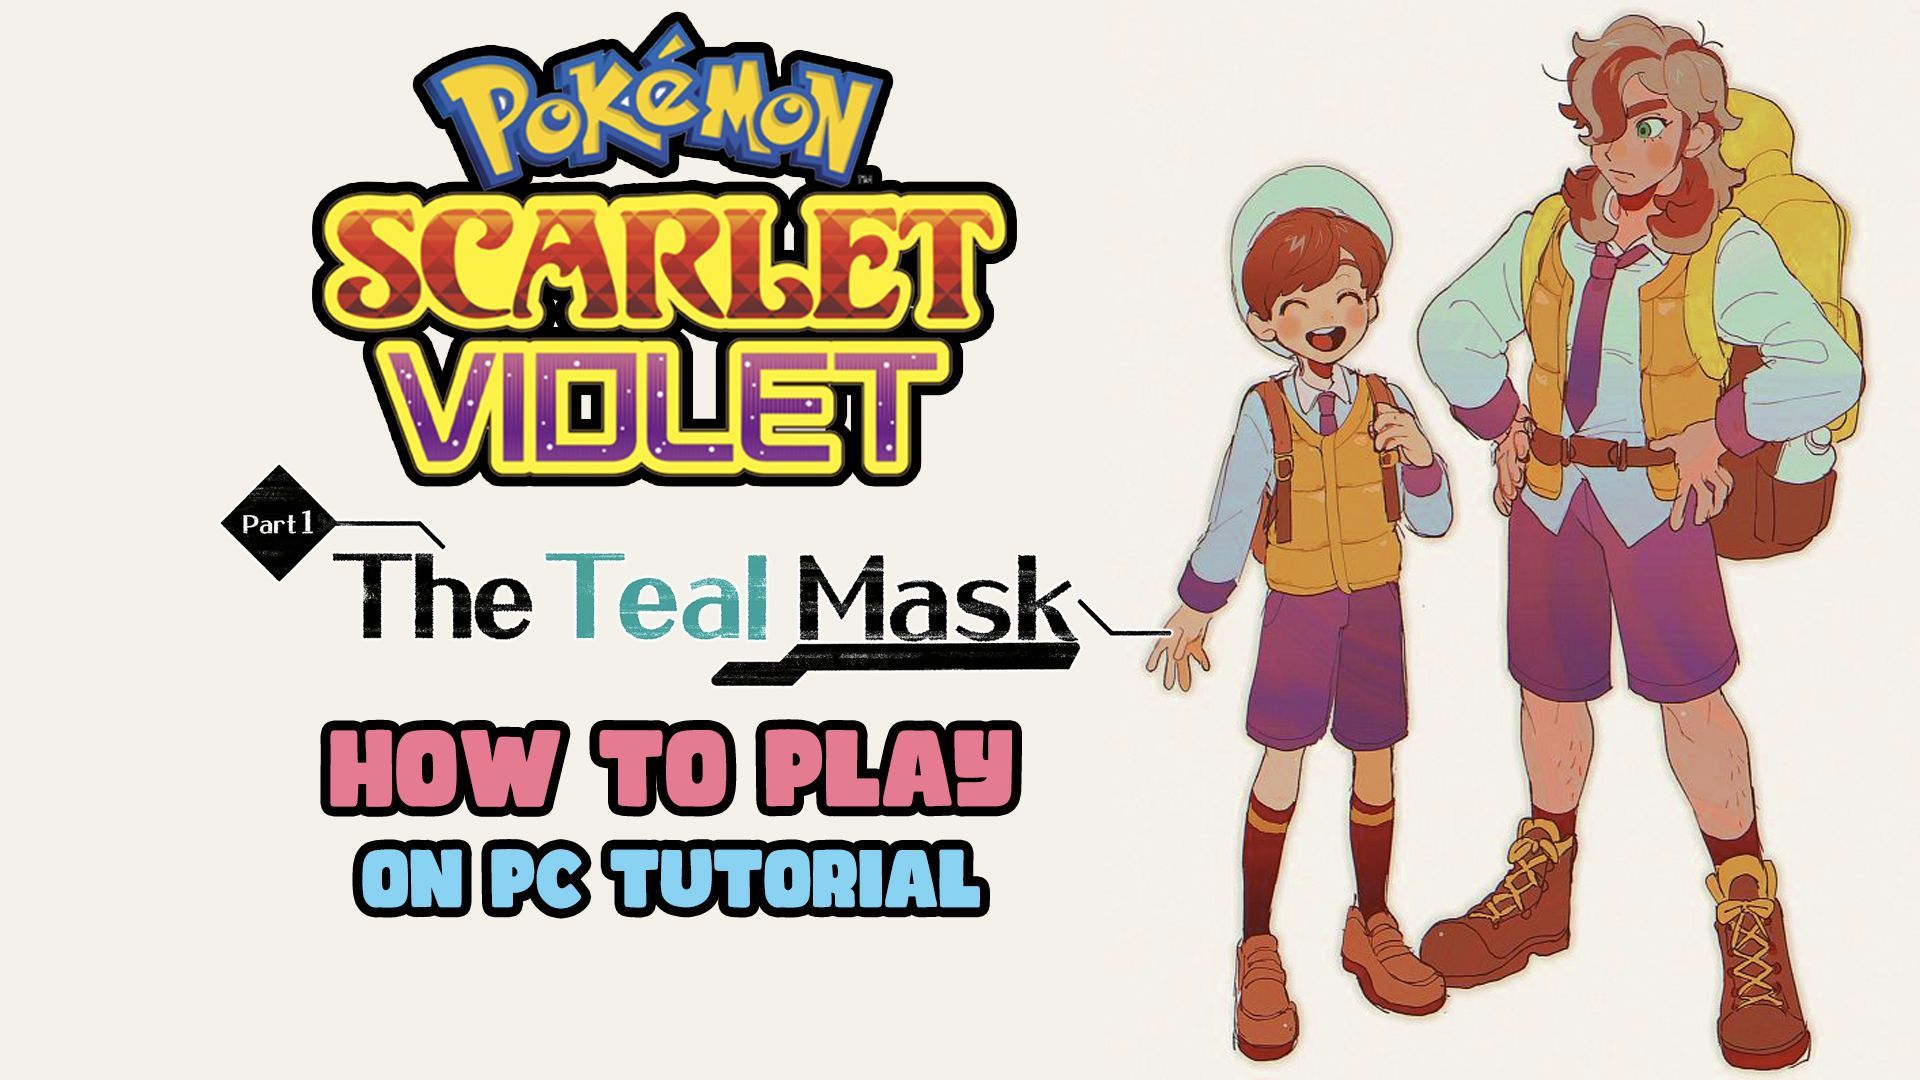 How to Play Pokémon Scarlet & Violet Part 1 DLC The Teal Mask On